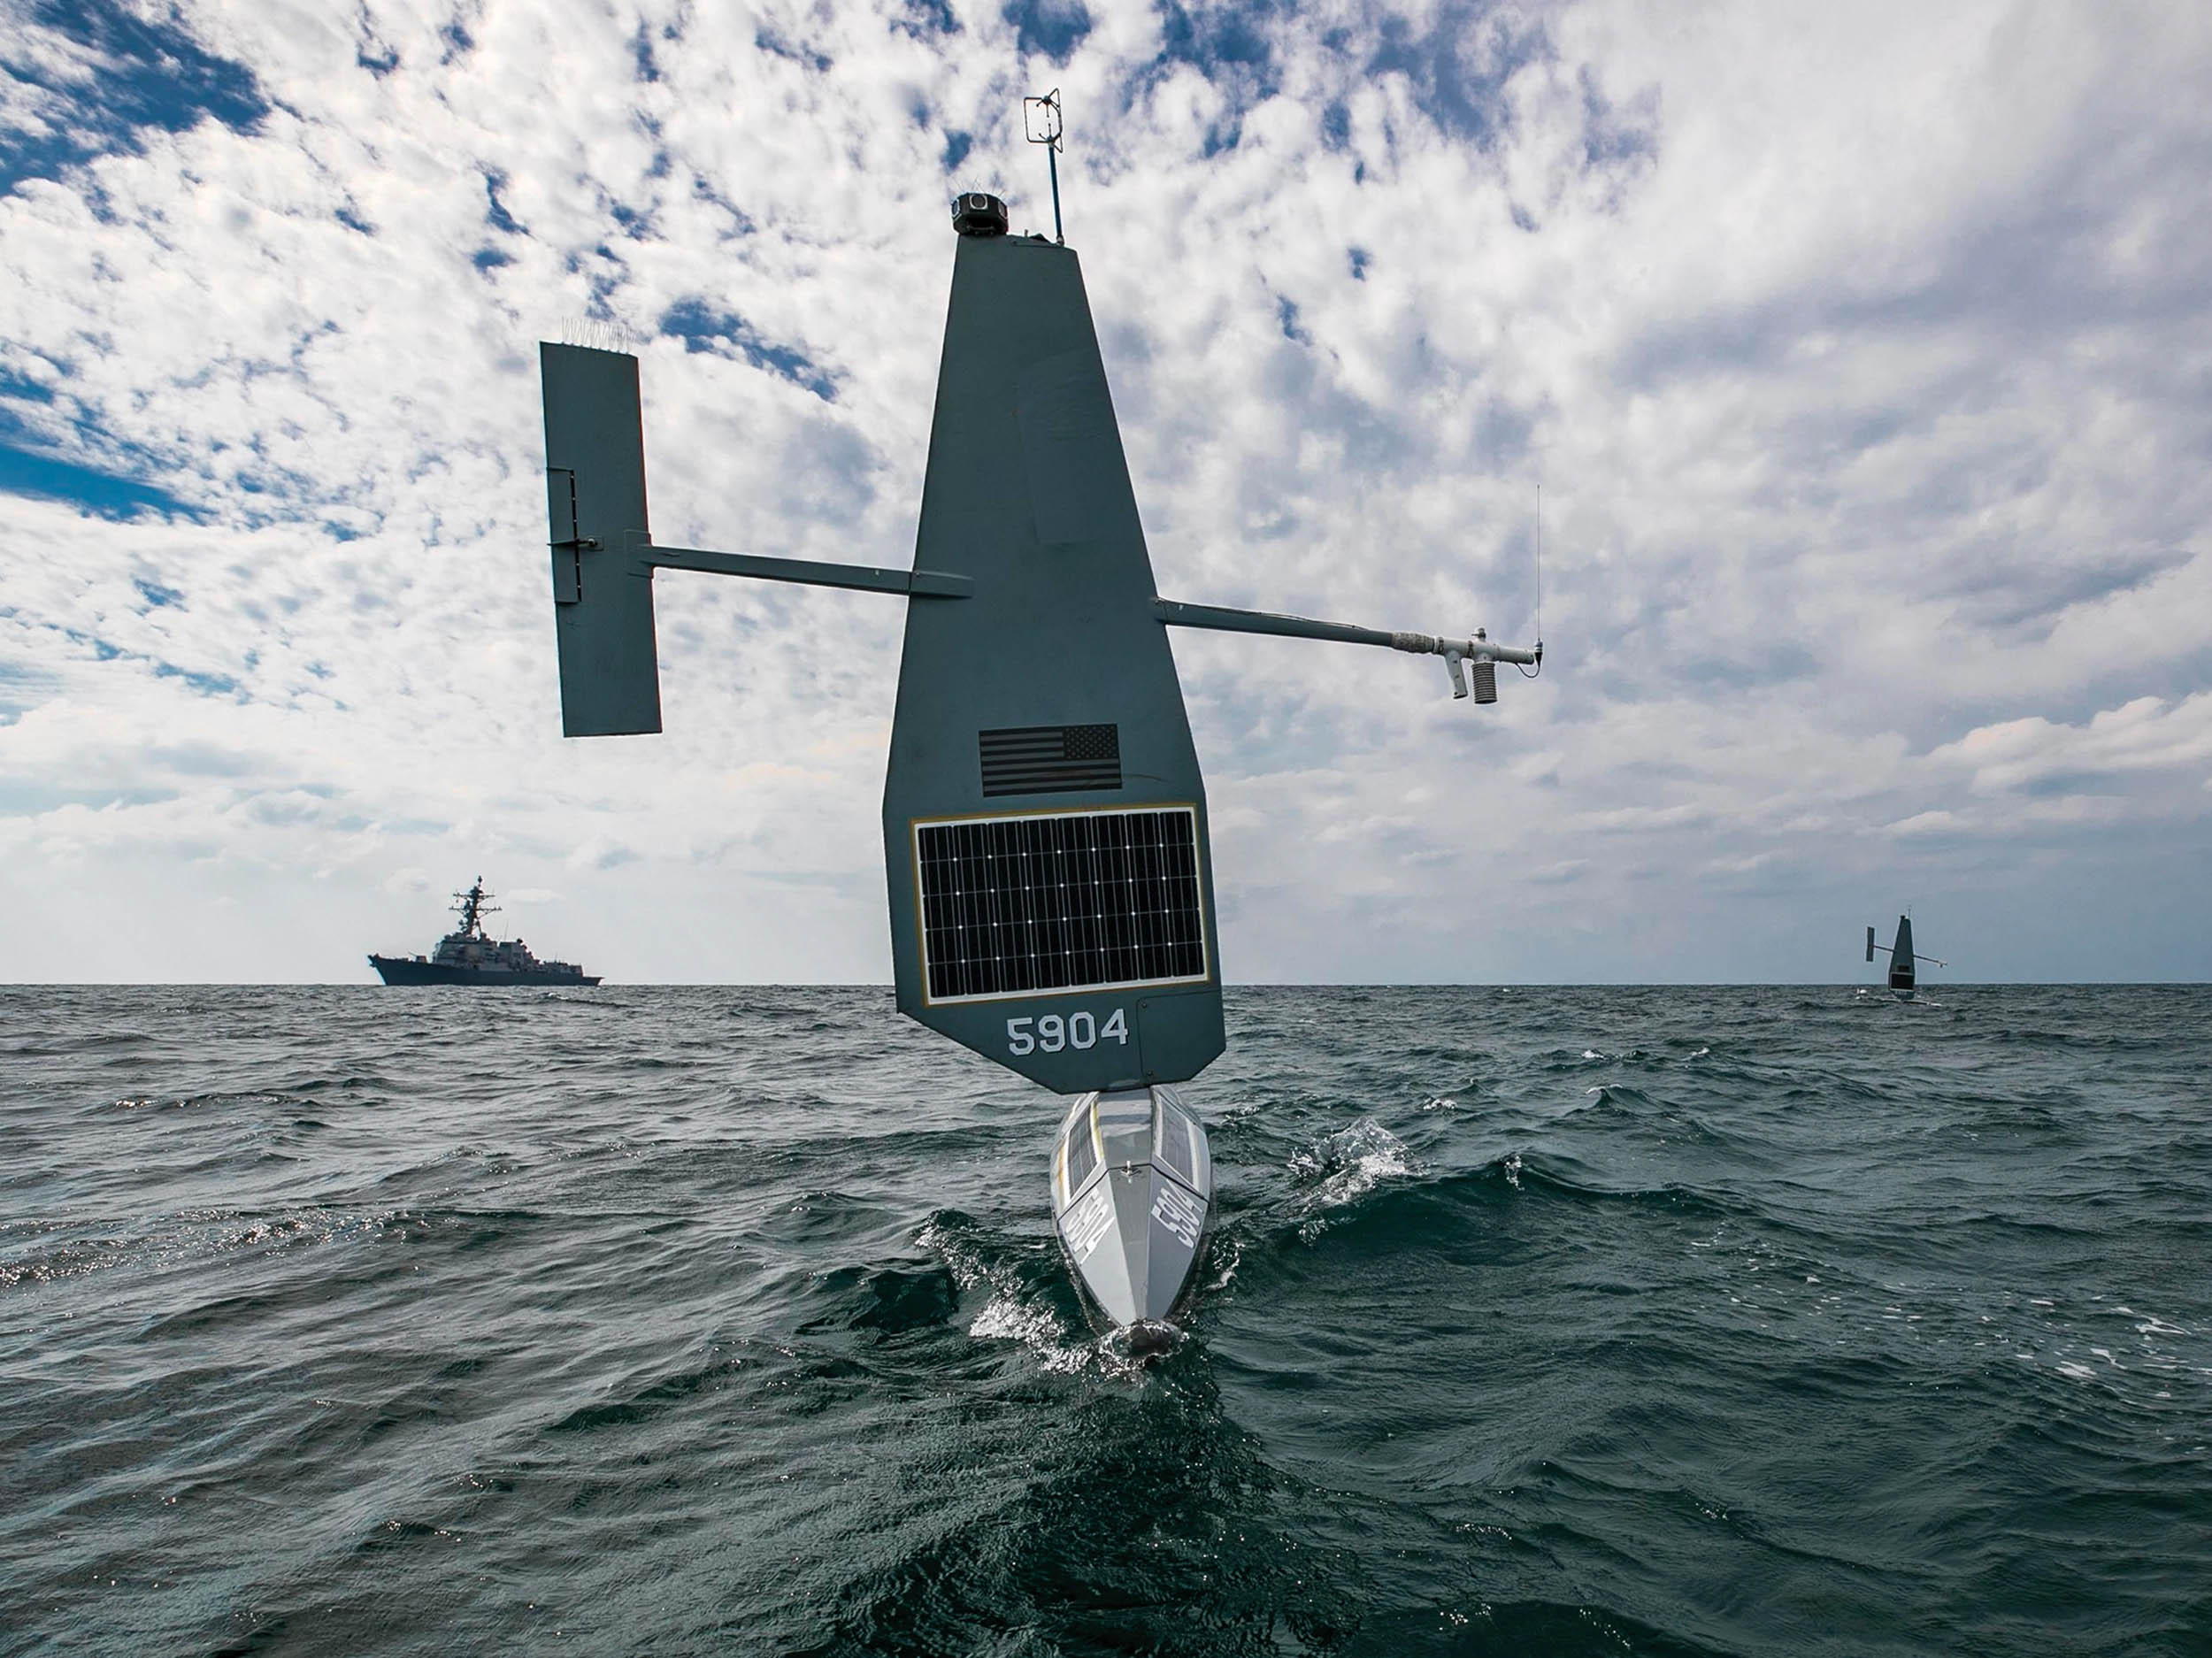 Saildrone Explorer unmanned surface vessel and guided-missile destroyer USS Delbert D. Black operate in Arabian Gulf, January 8, 2023 (U.S. Navy/Jeremy Boan)